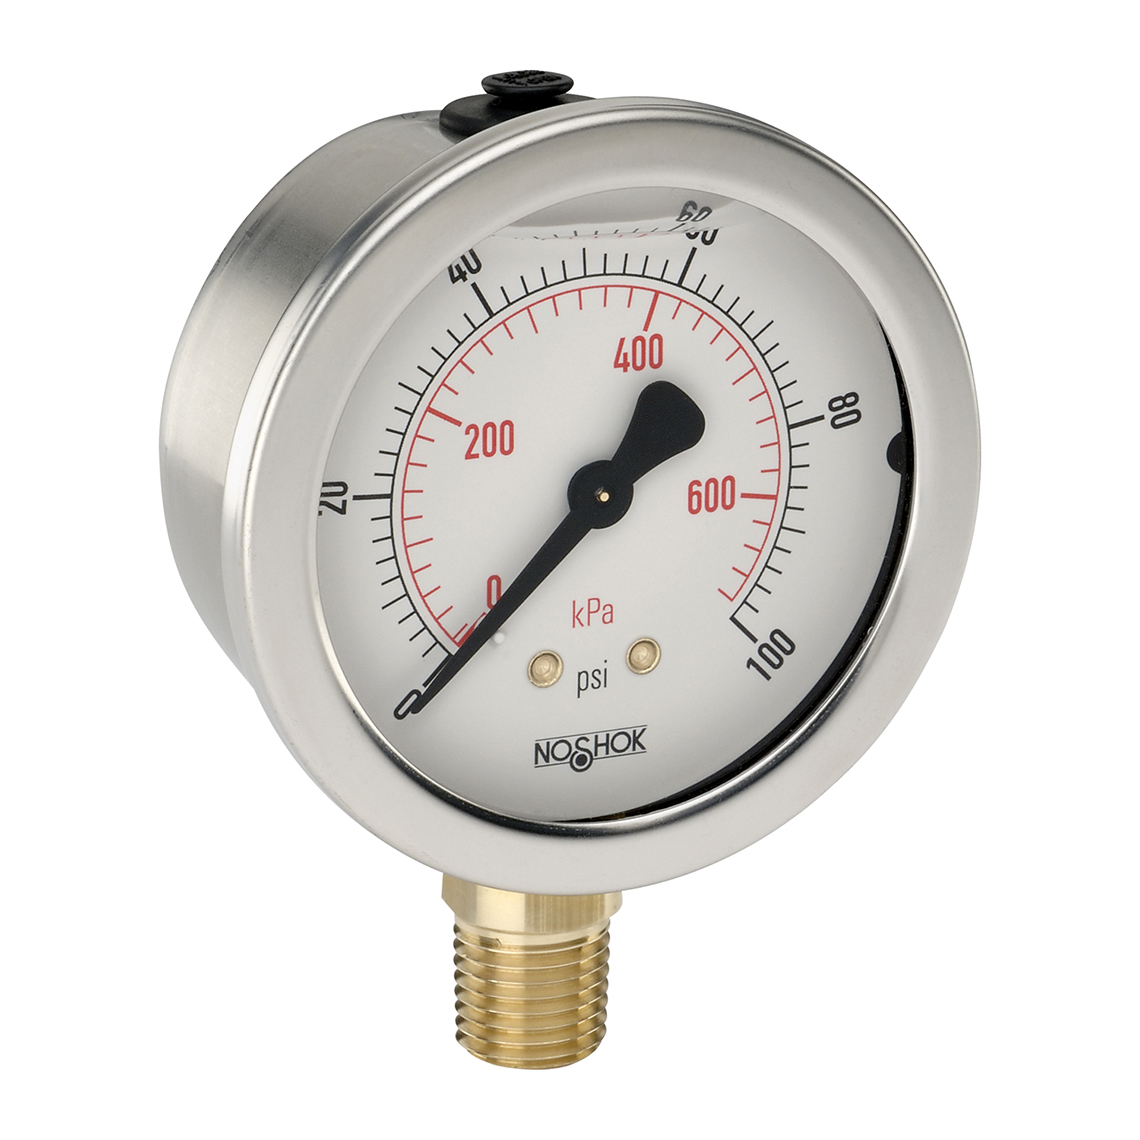 25-901-160-psi/kPa-BP1-GY40 900 Series ABS and Stainless Steel Liquid Filled Pressure Gauges